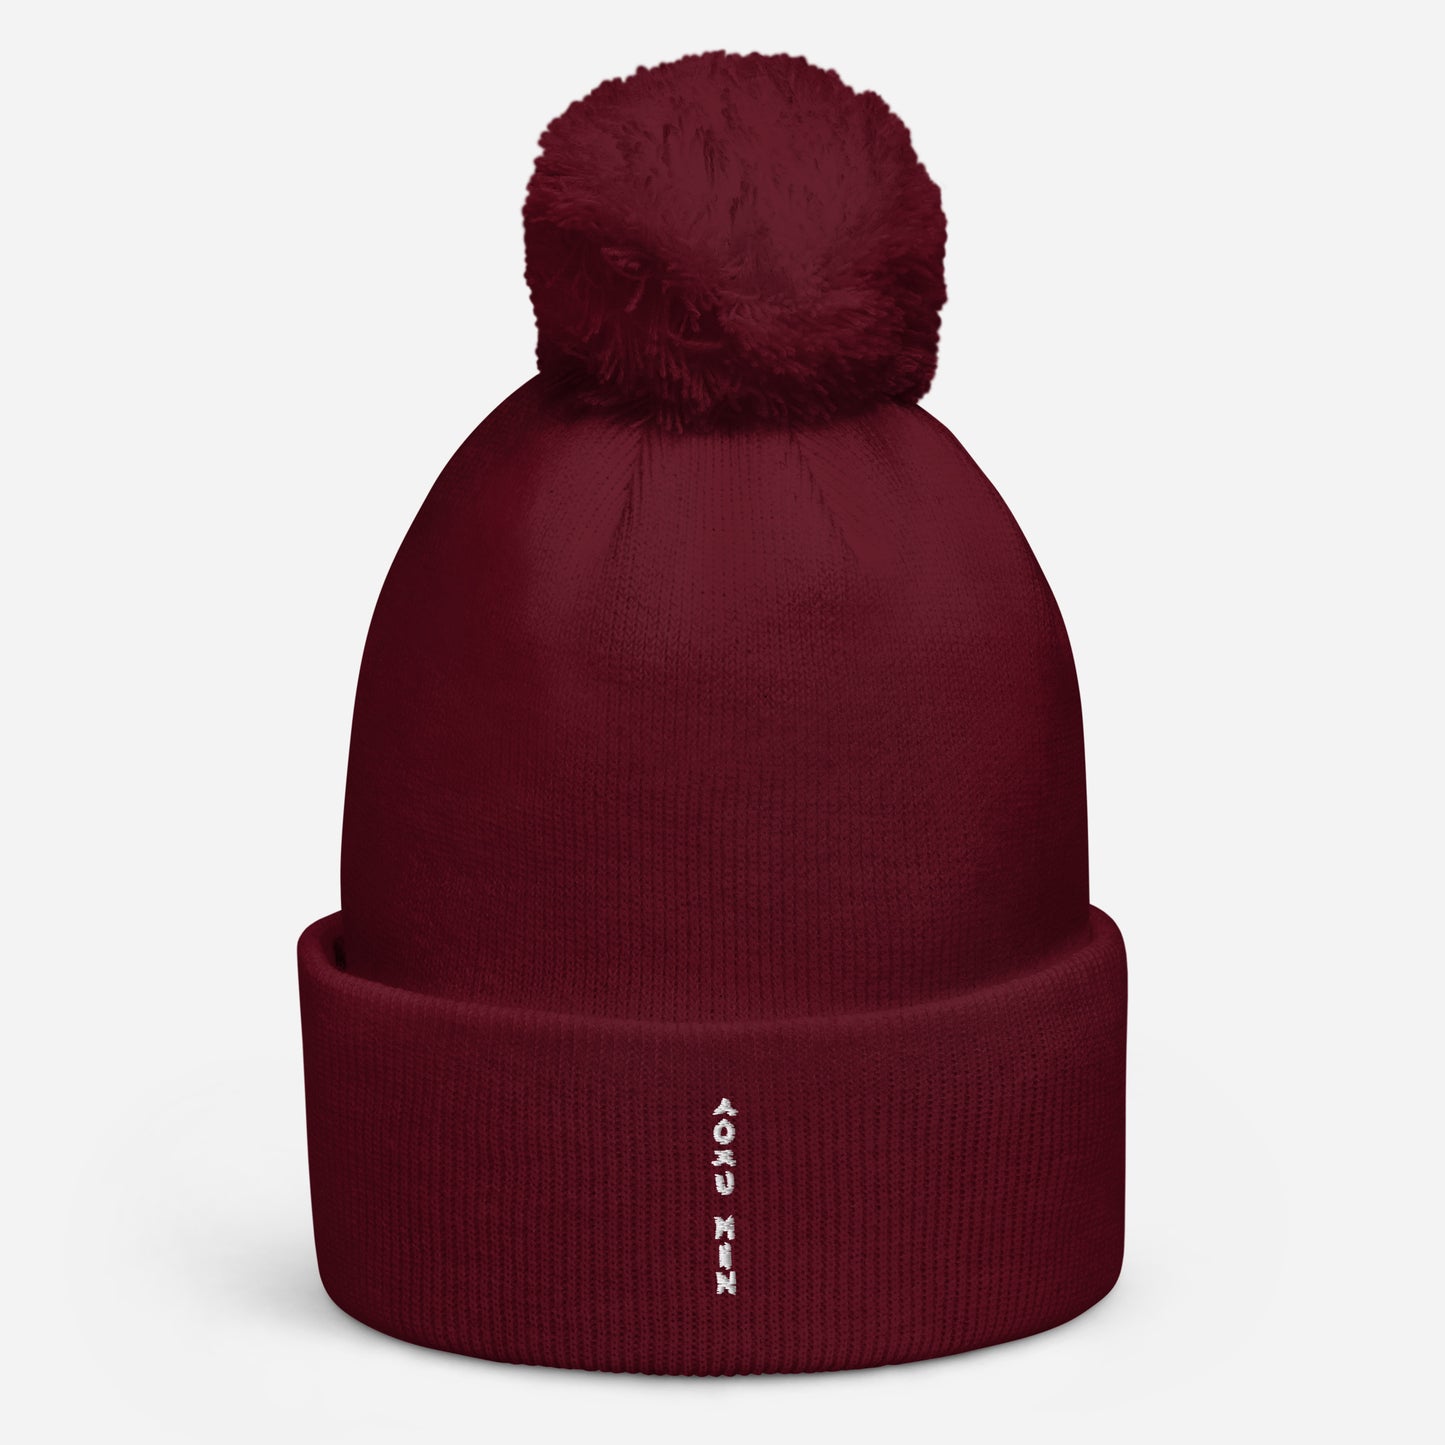 Red Korean style bobble hat by Soju Man Designs